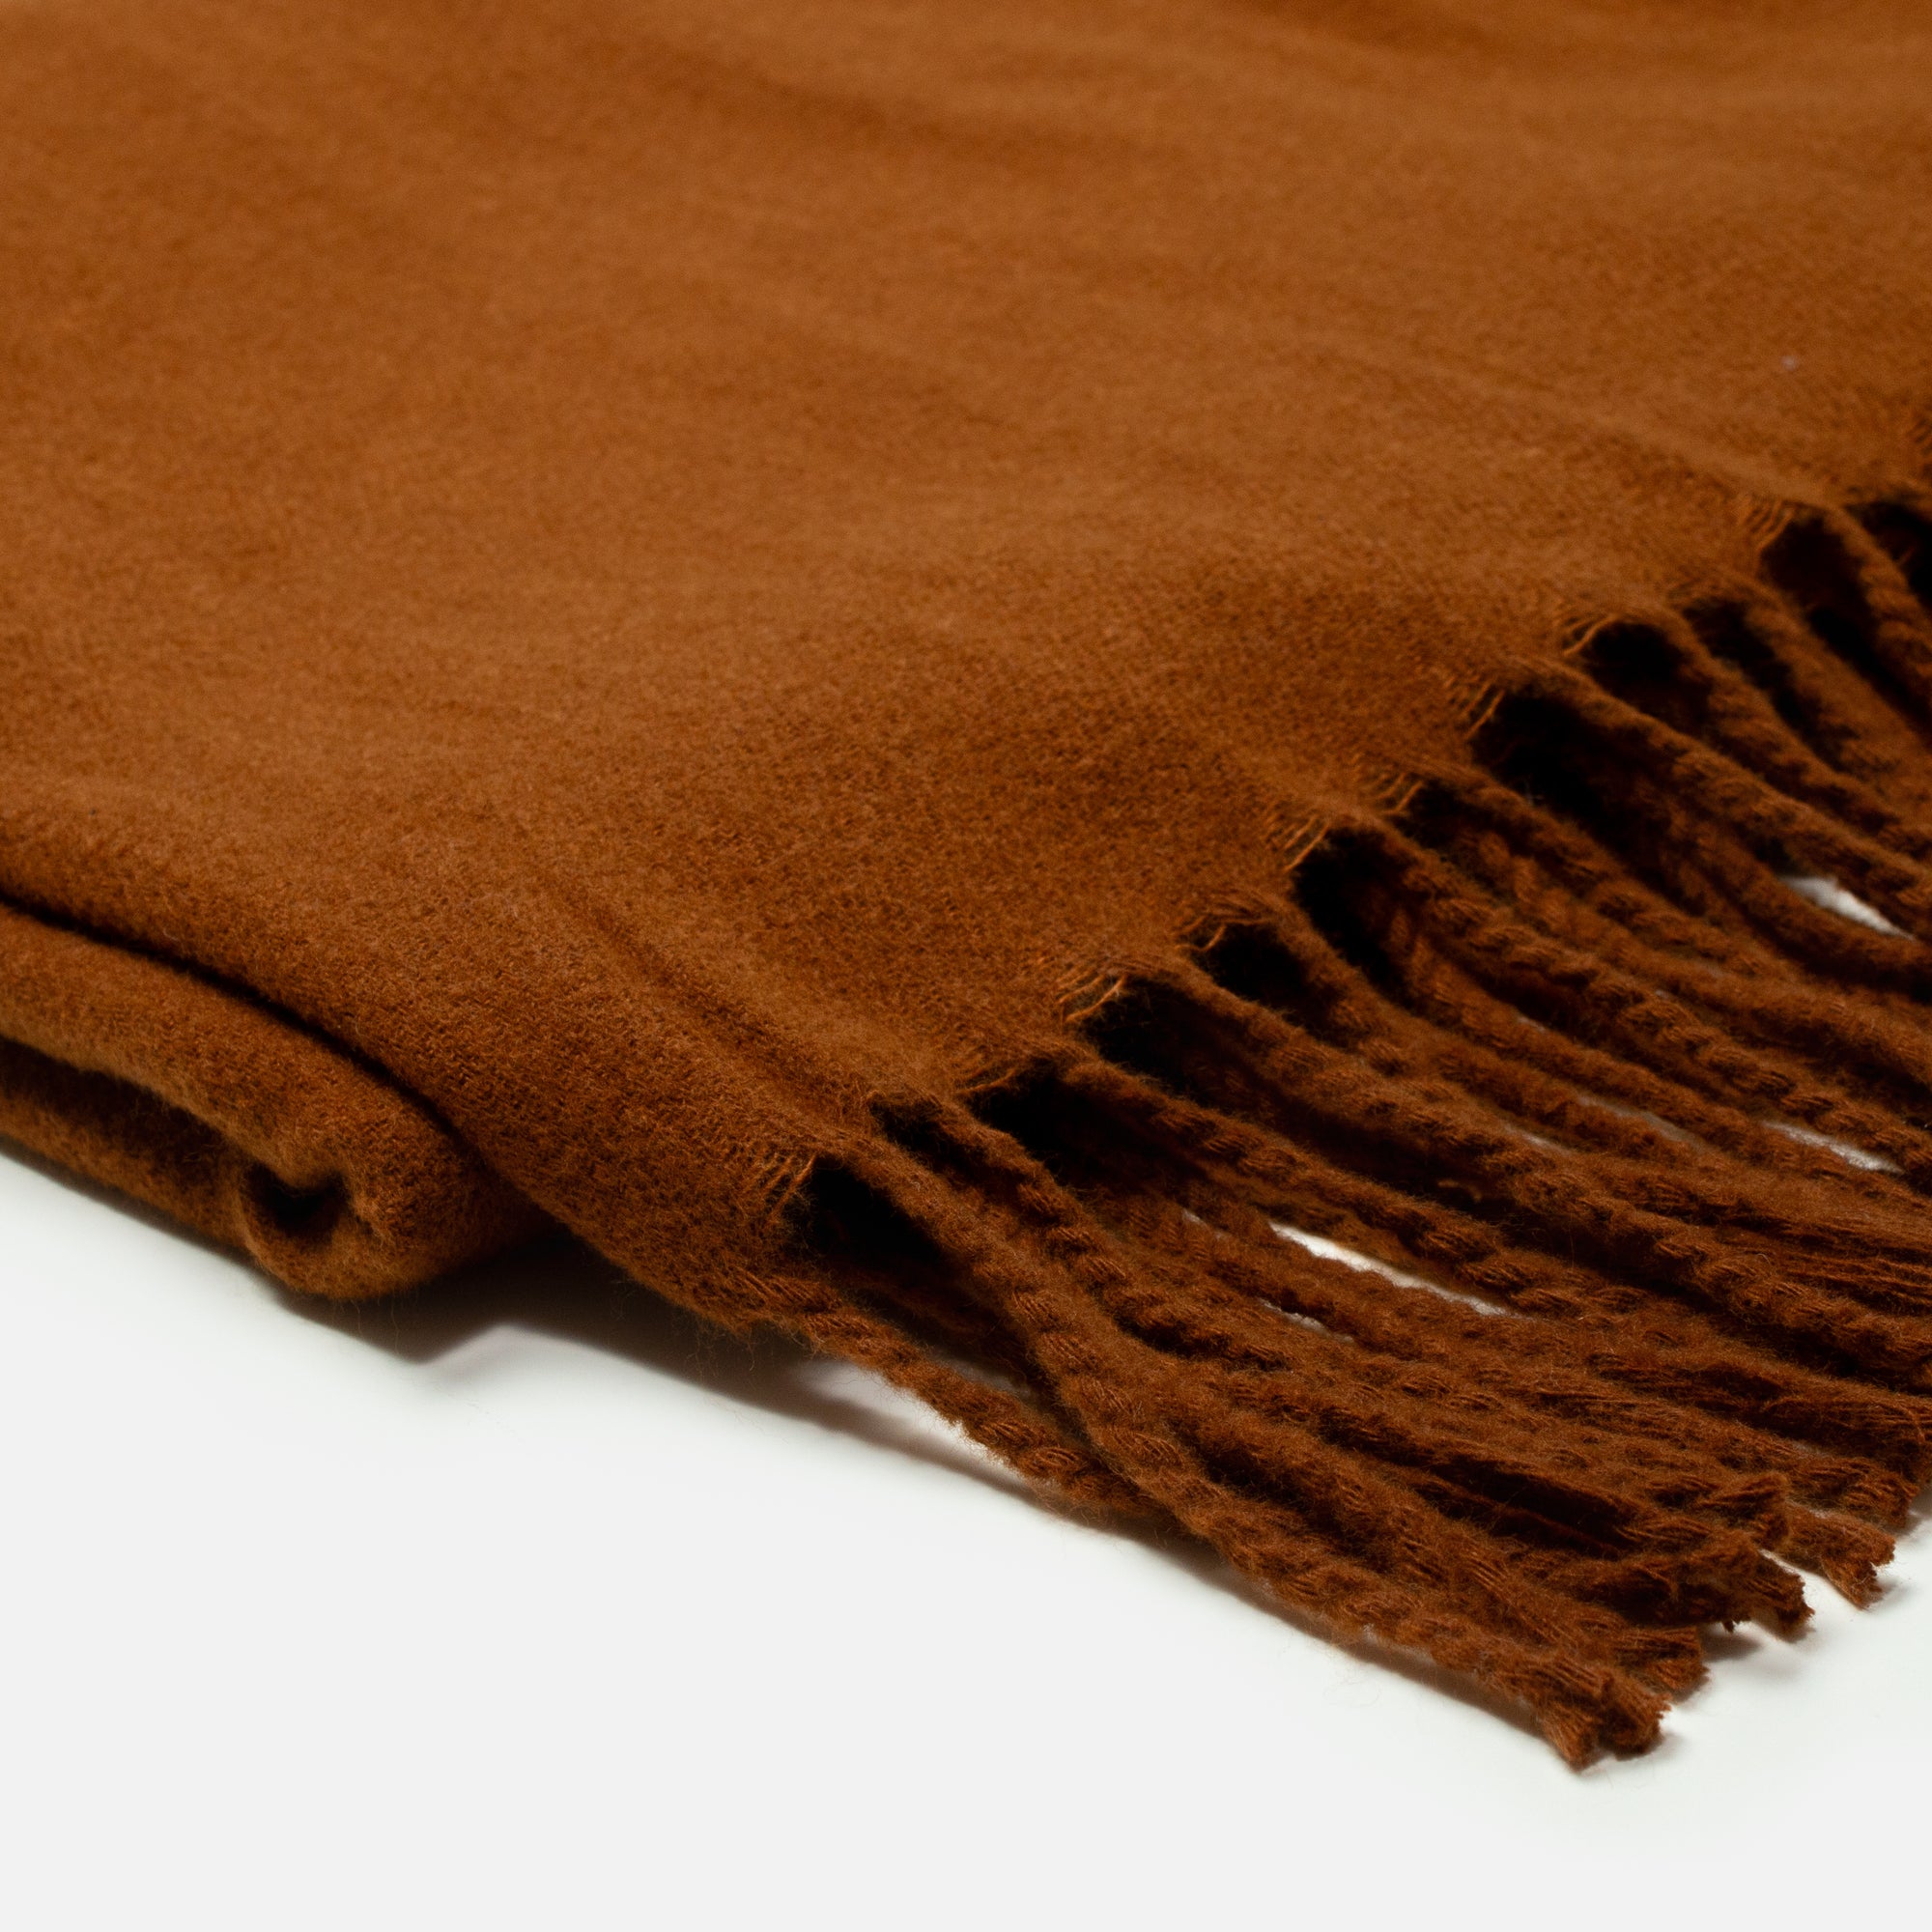 Brown fringed scarf